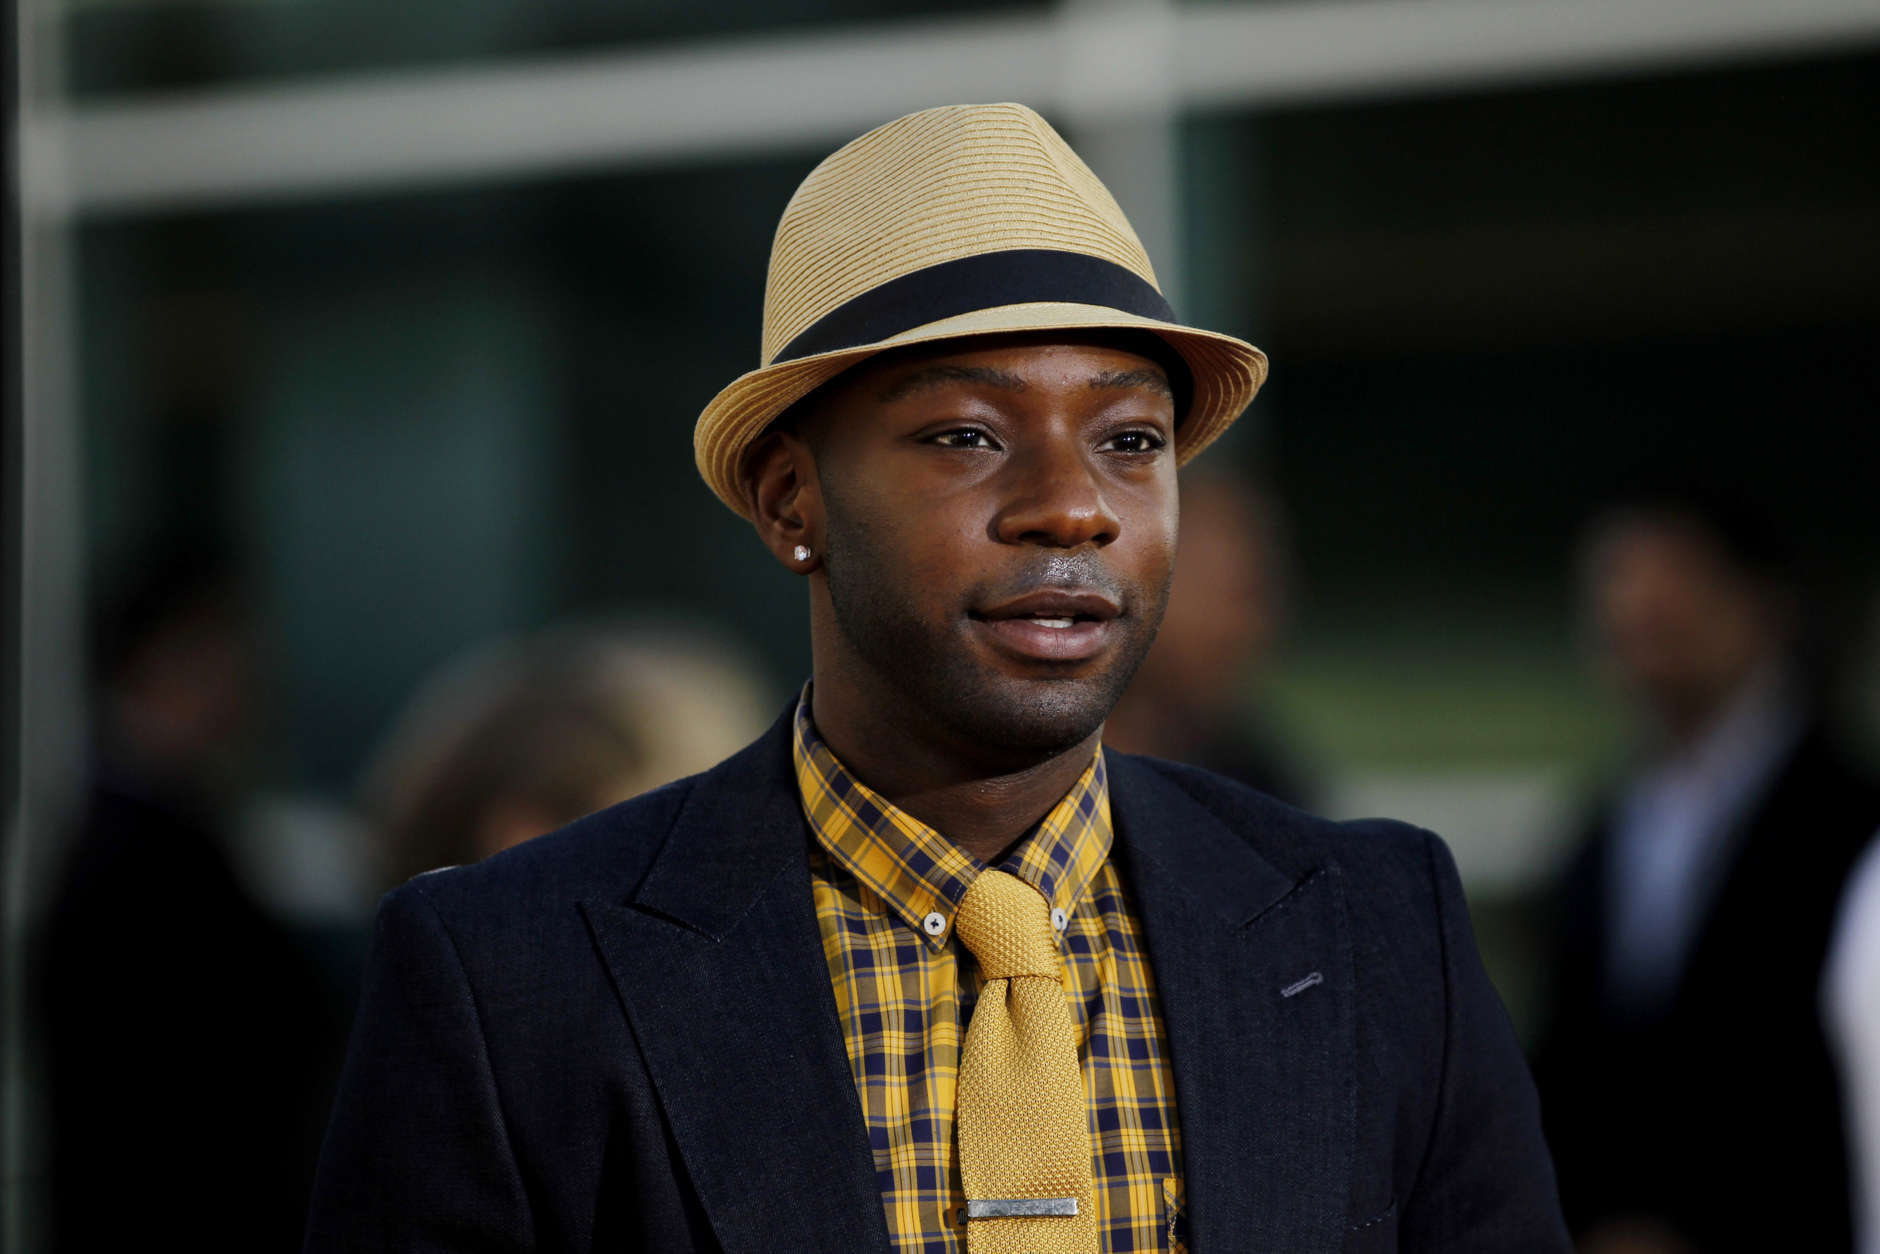 FILE - In this June 21, 2011 file photo, Nelsan Ellis arrives at the premiere for the fourth season of HBO's "True Blood" in Los Angeles. Ellis, best known for playing the character of Lafayette Reynolds on "True Blood," has died at the age of 39. Ellis' manager Emily Gerson Saines confirmed the actor's death in an email Saturday, July 8, 2017. (AP Photo/Matt Sayles, File)